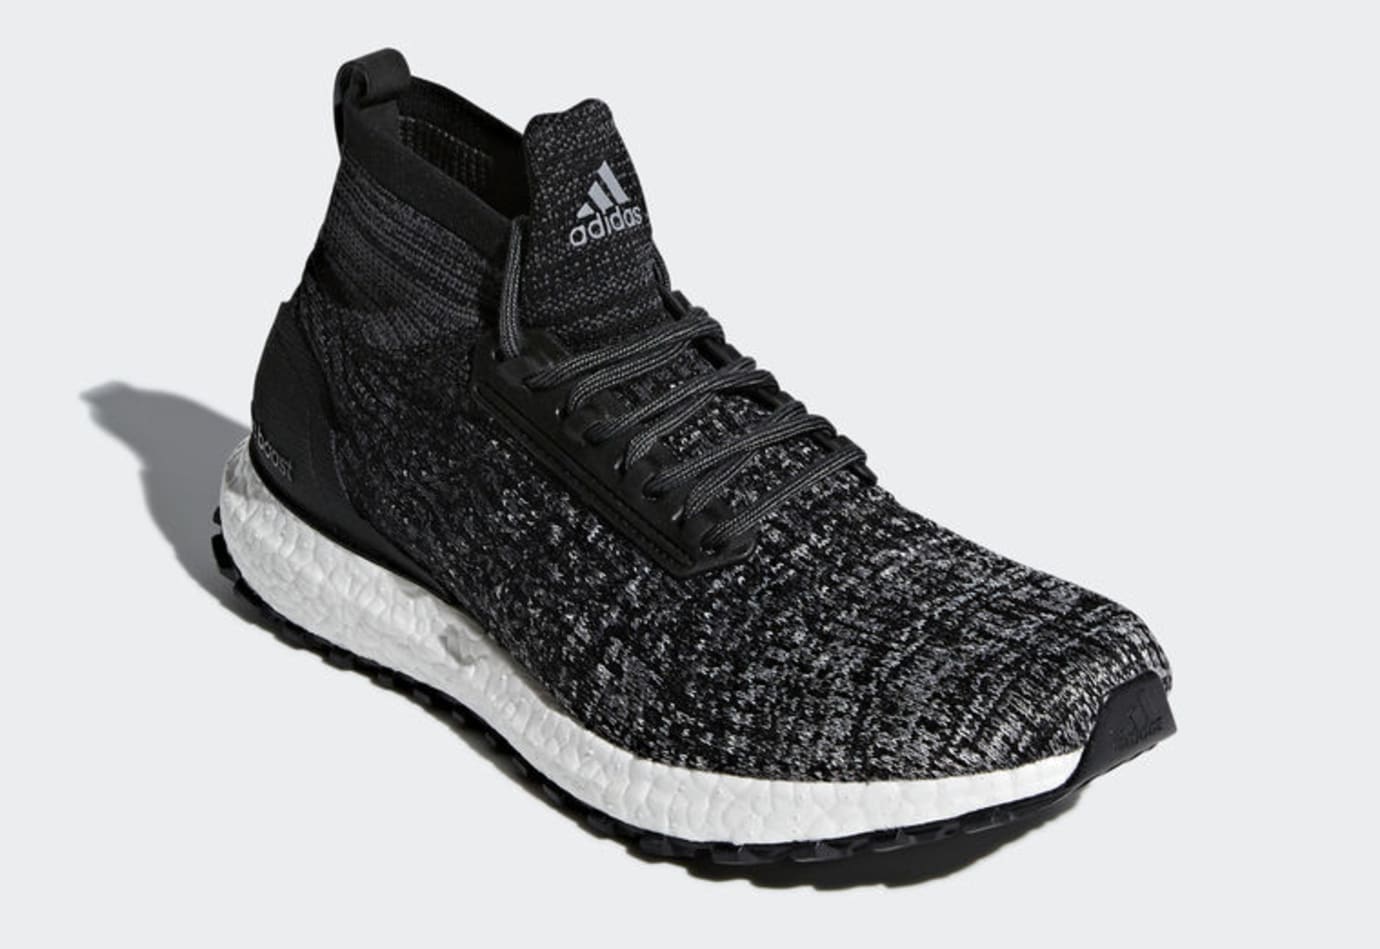 Reigning Champ x Adidas Ultra Boost Terrain Release Date | Sole Collector